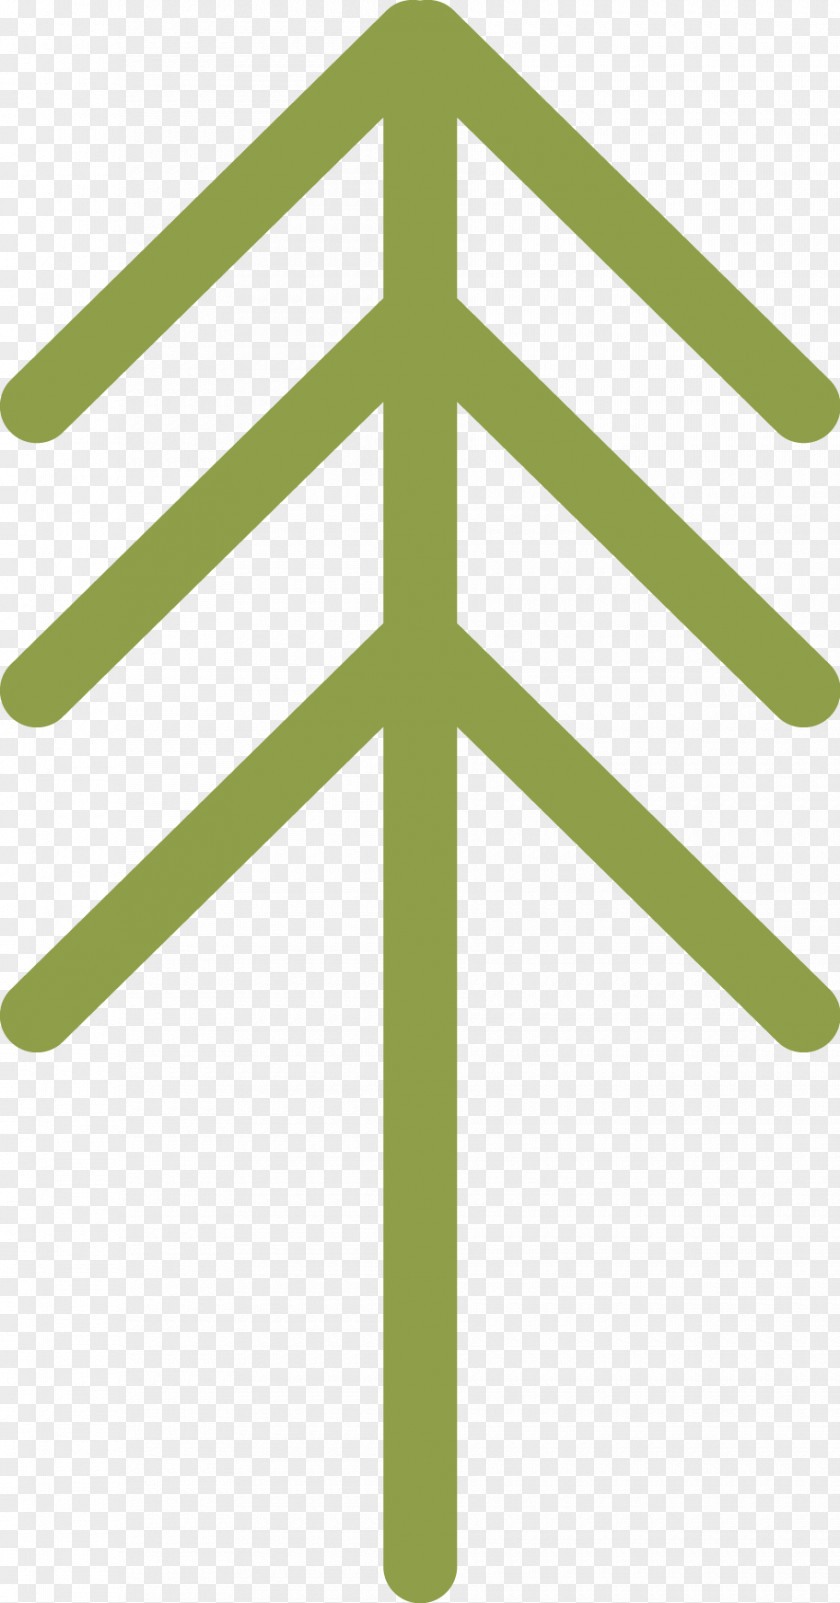 Little Tree Consultant Marketing Architecture Professional PNG